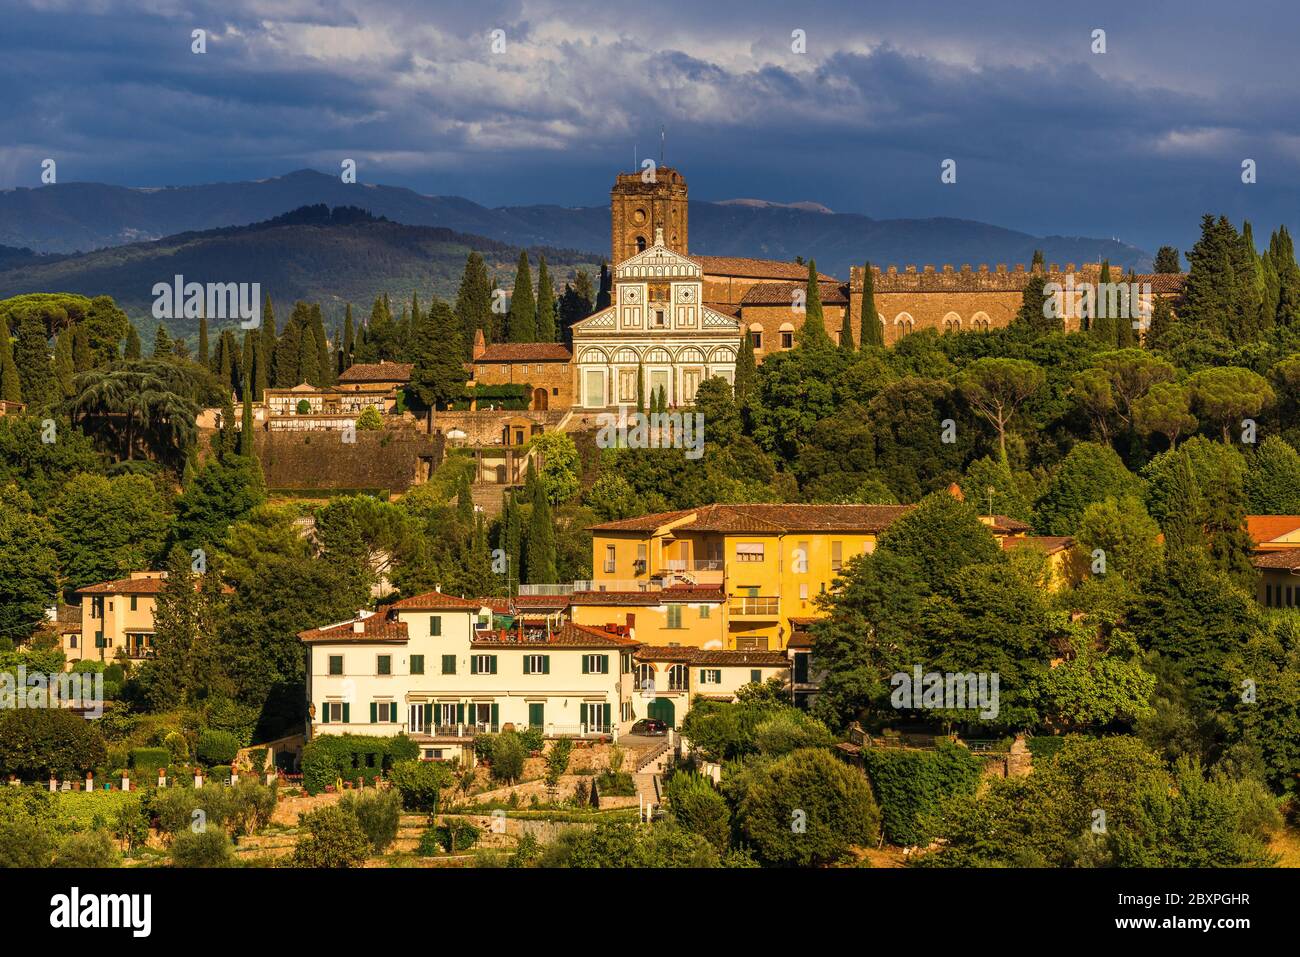 romanesque church of San Miniato al Monte in Florence, Italy, shot from the Forte di Belvedere in a hilly environment Stock Photo